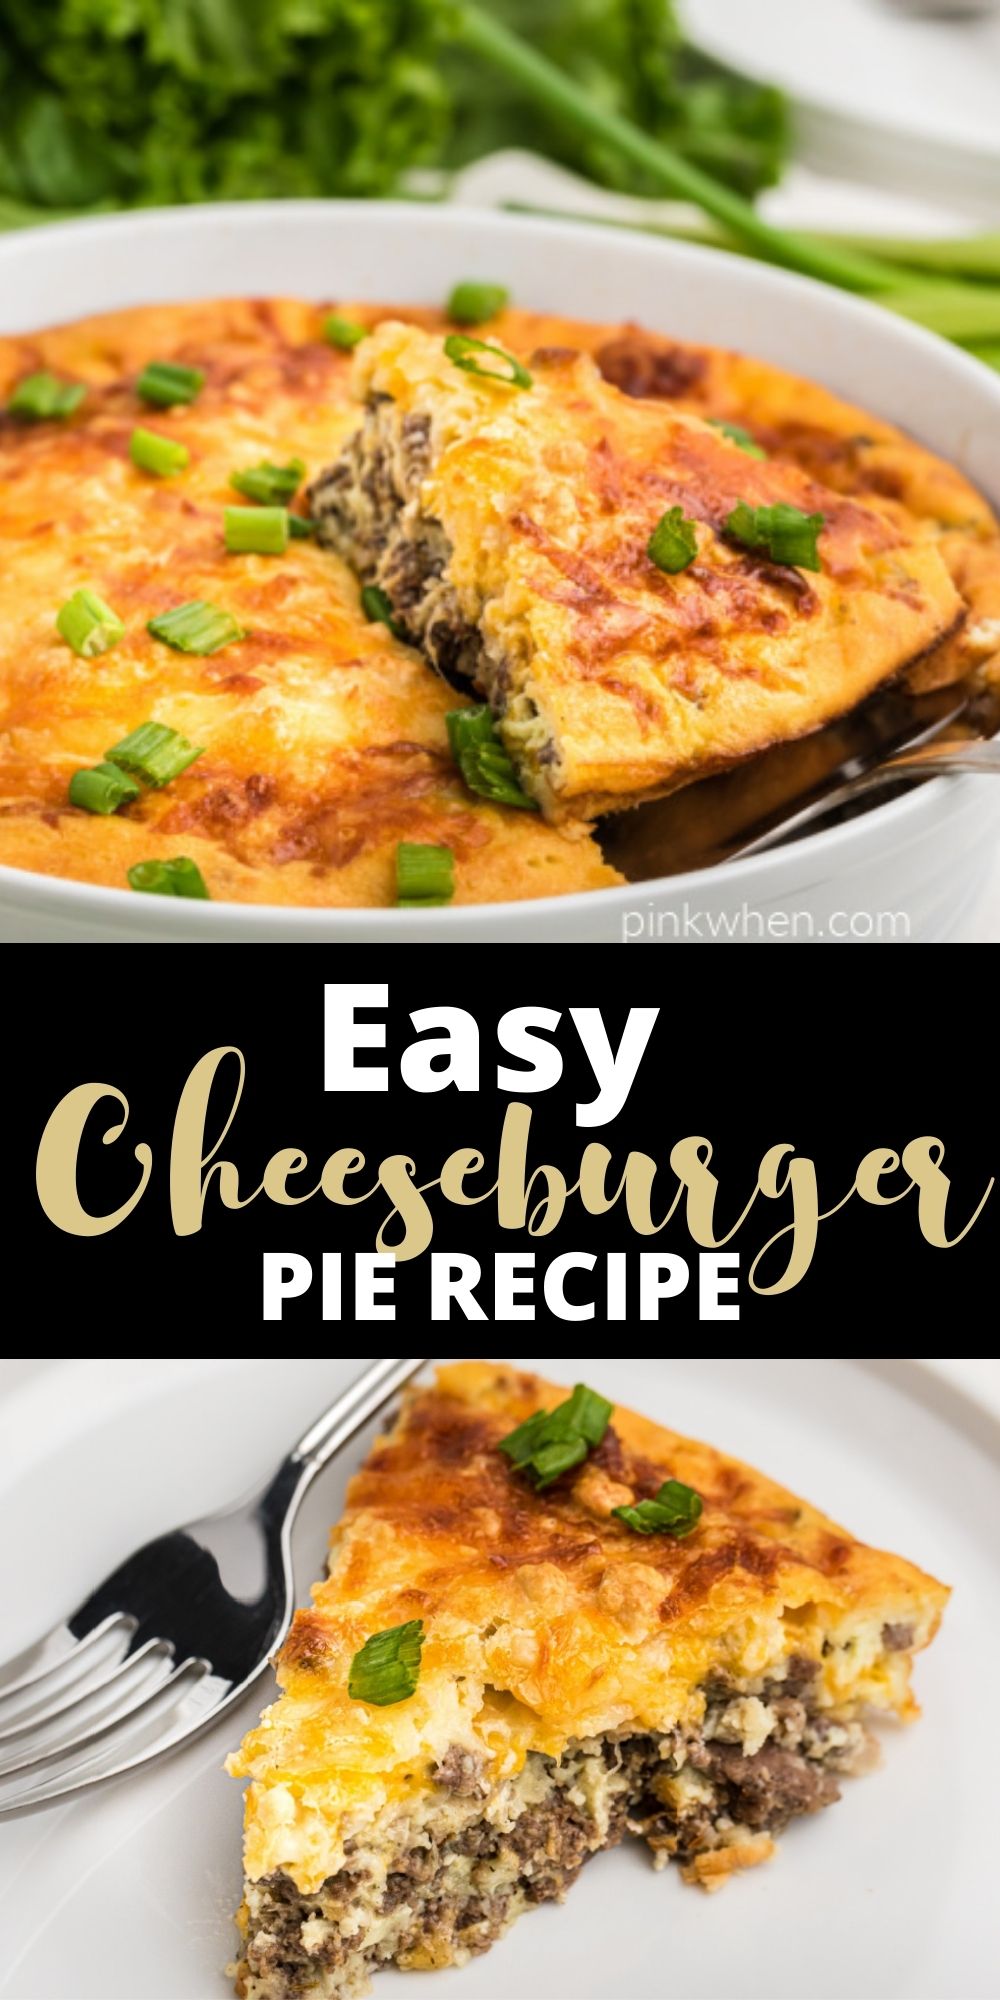 This delicious and easy Cheeseburger Pie is a hearty weeknight meal that the whole family will love. This easy family recipe is made with ground beef, Bisquick, cheese, and more. You'll love how delicious this dinner pie is and how fast it gets devoured!